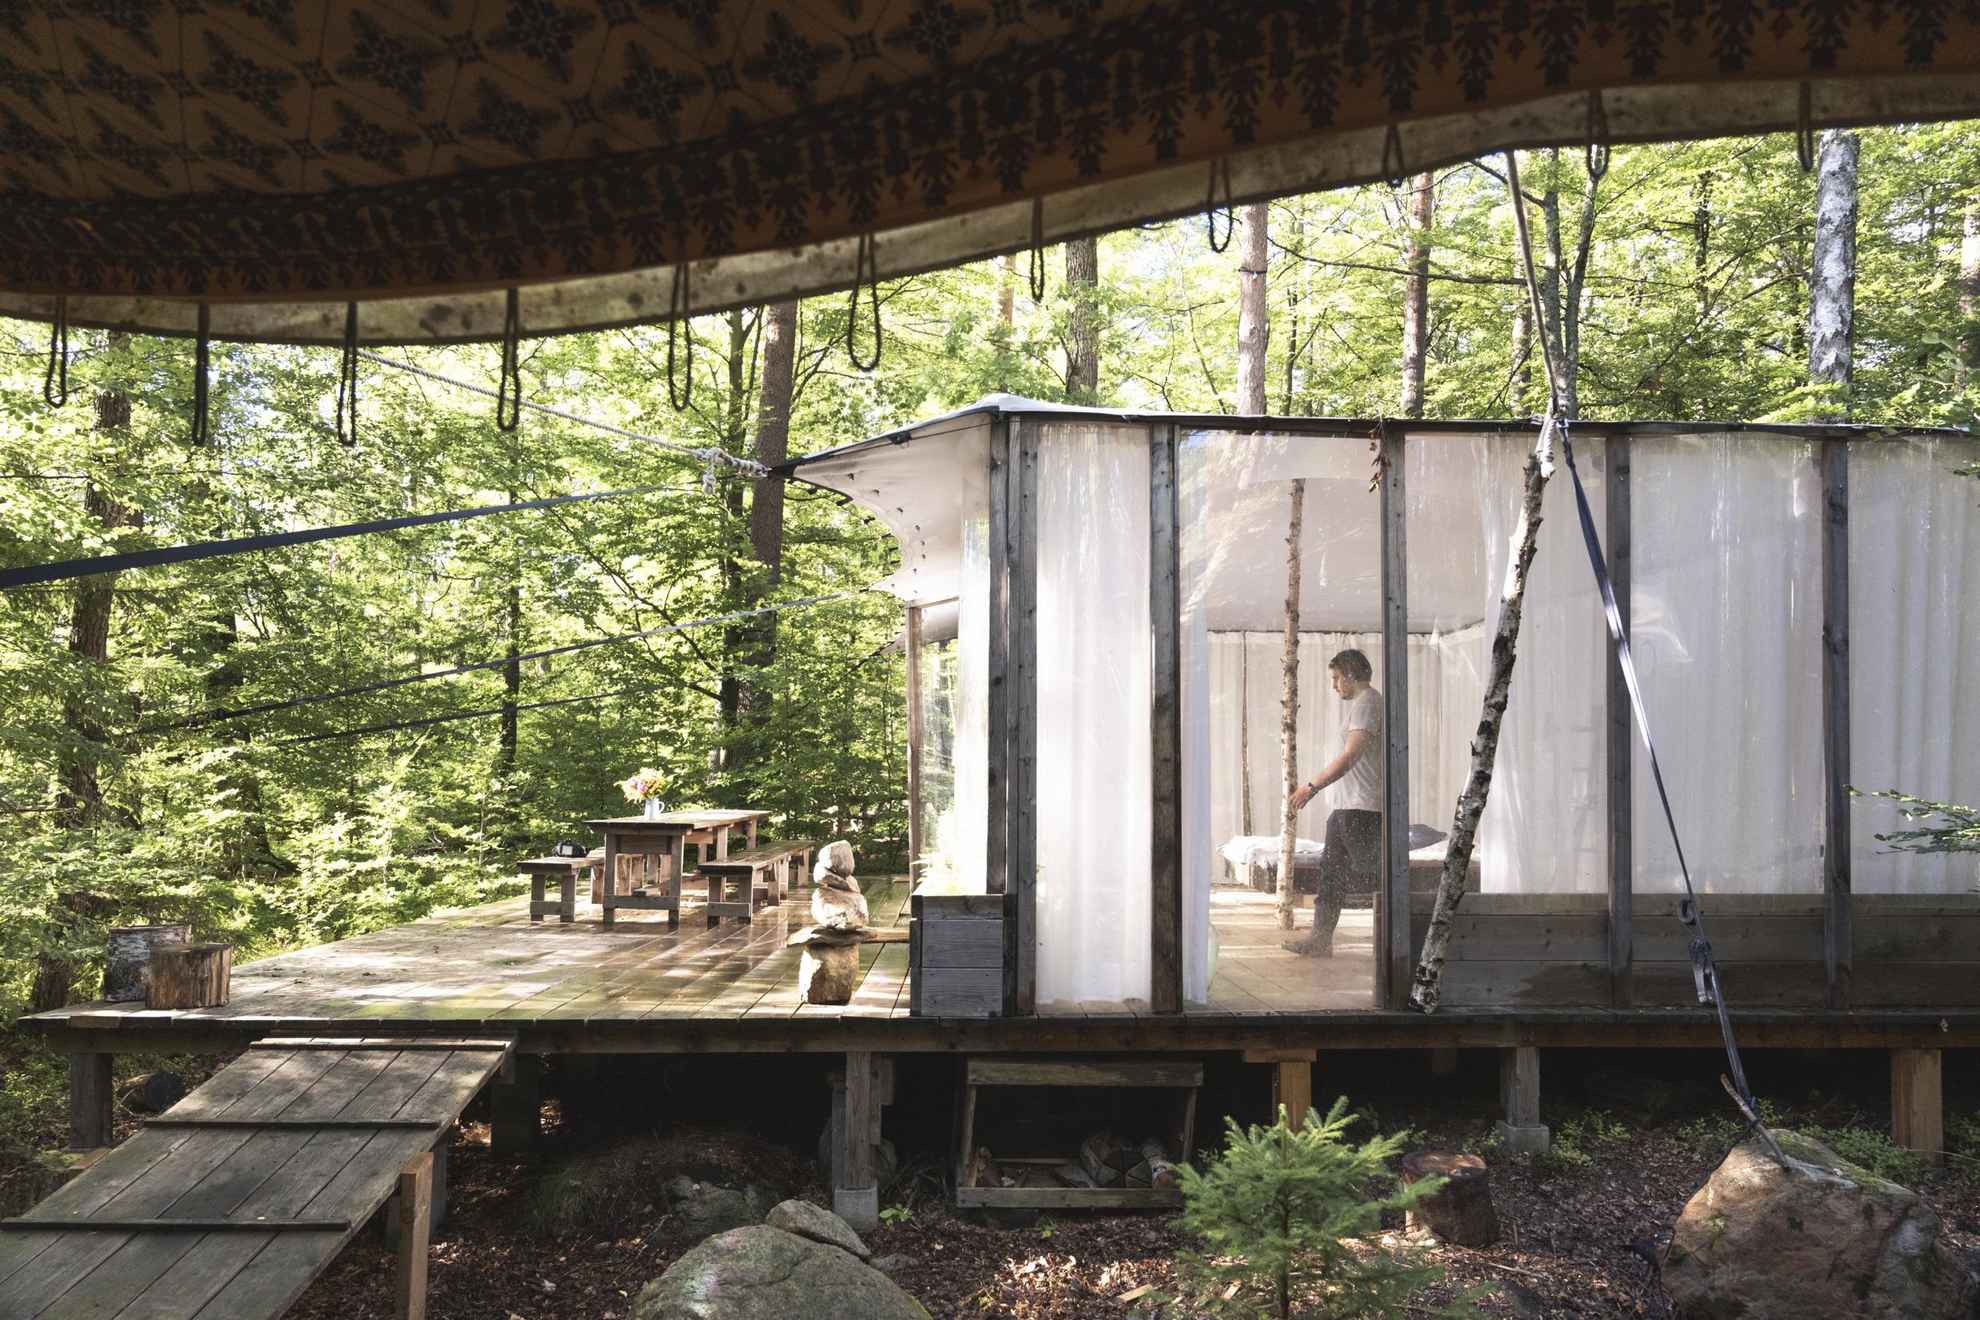 Exterior of a light and transparent tree-house style cottage in the woods, with green foliage all around and a man walking through the room.